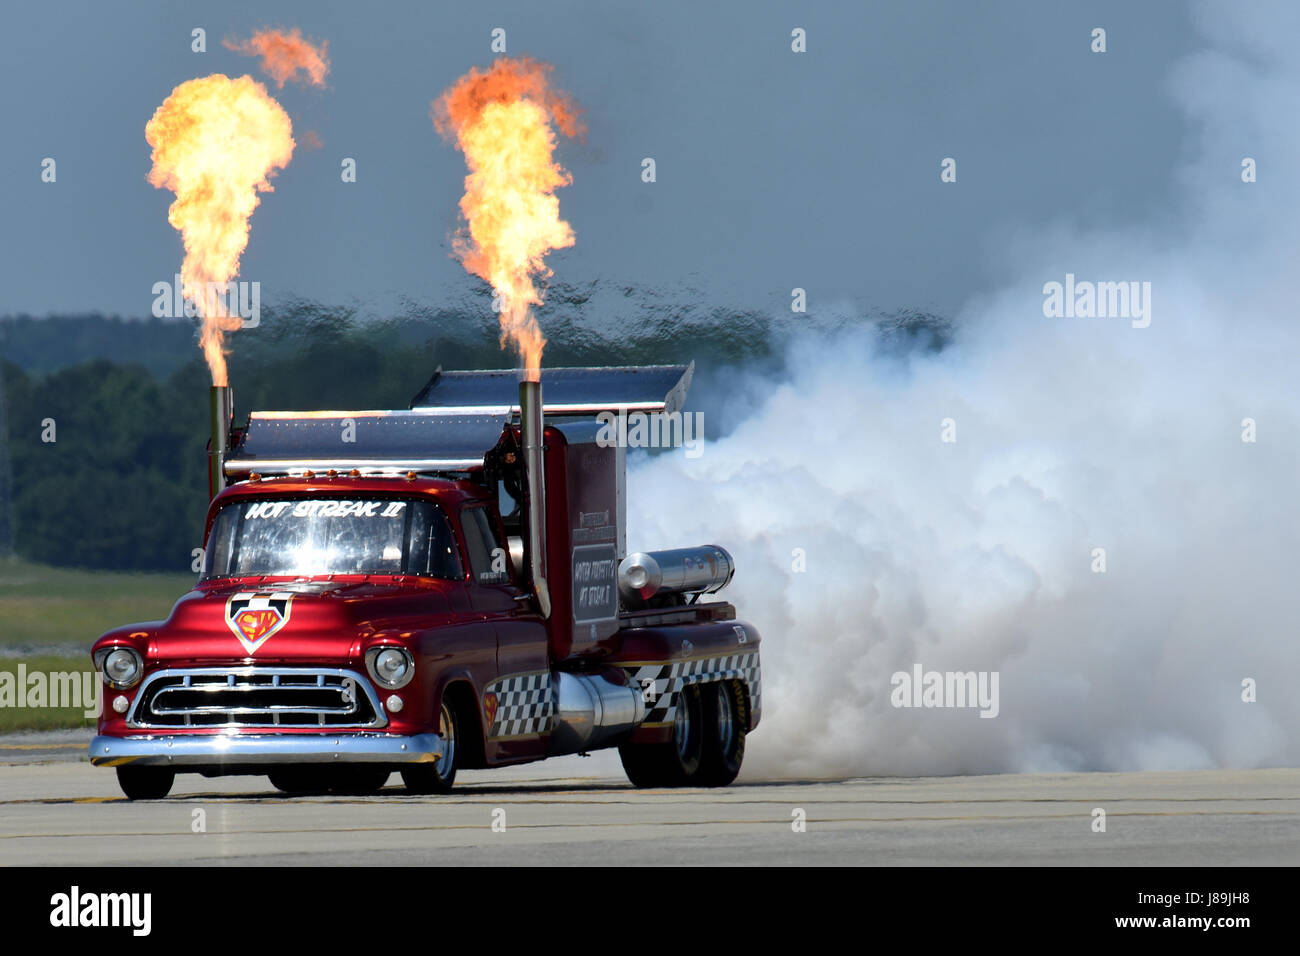 The Smoke-N-Thunder jet truck participated in the Wings Over Wayne Air Show, May 20, 2017, at Seymour Johnson Air Force Base, North Carolina. The Hot Streak II is a twin-jet engine 1957 Chevrolet pickup, capable of reaching speeds exceeding 350 miles per hour. (U.S. Air Force photo by Airman 1st Class Miranda A. Loera) Stock Photo